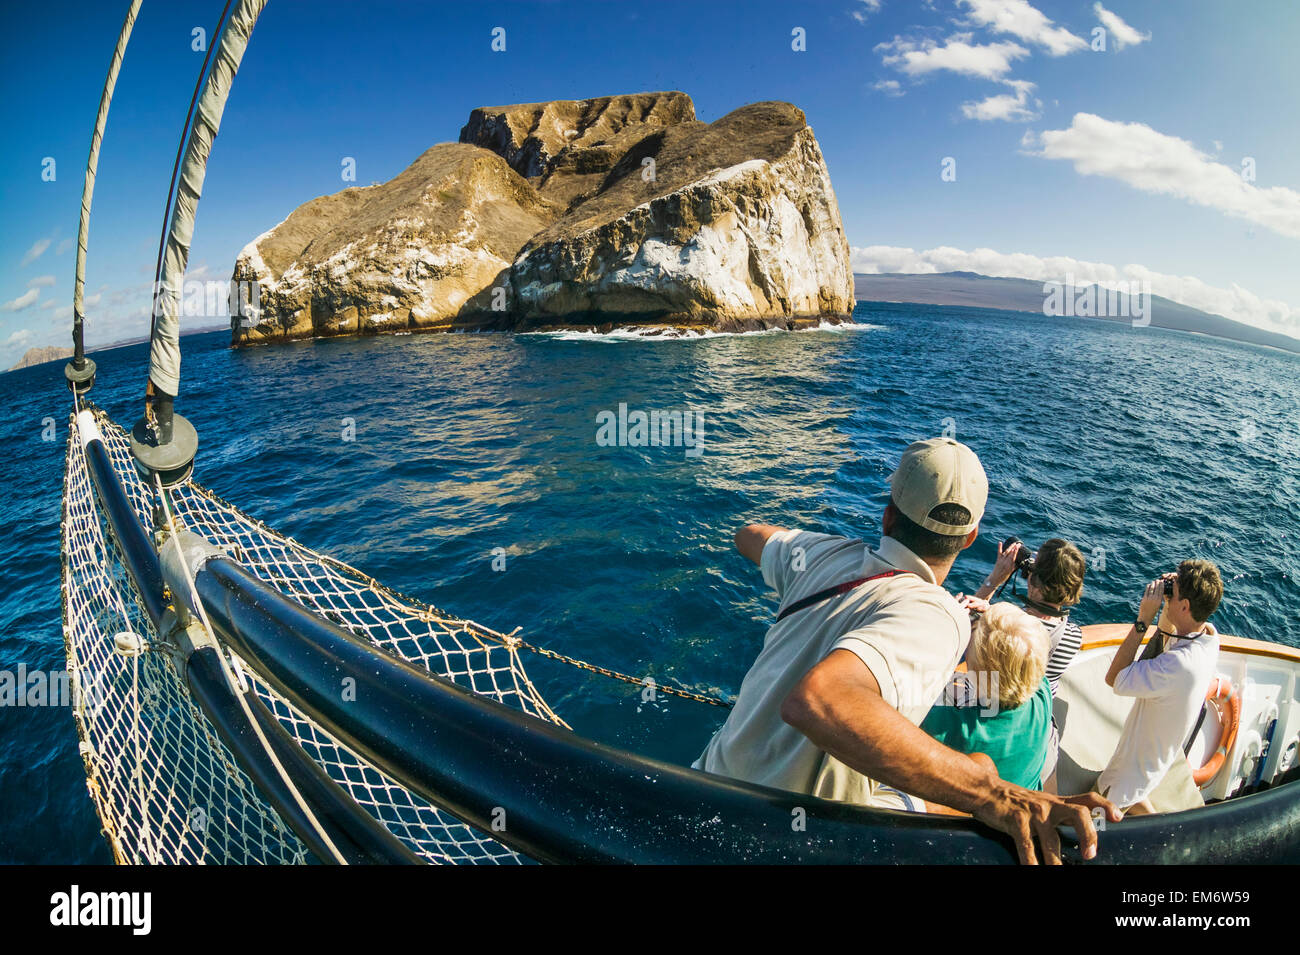 Tourists on board a travel and tourism ship with a view of Kicker Rock; Galapagos Islands, Ecuador Stock Photo